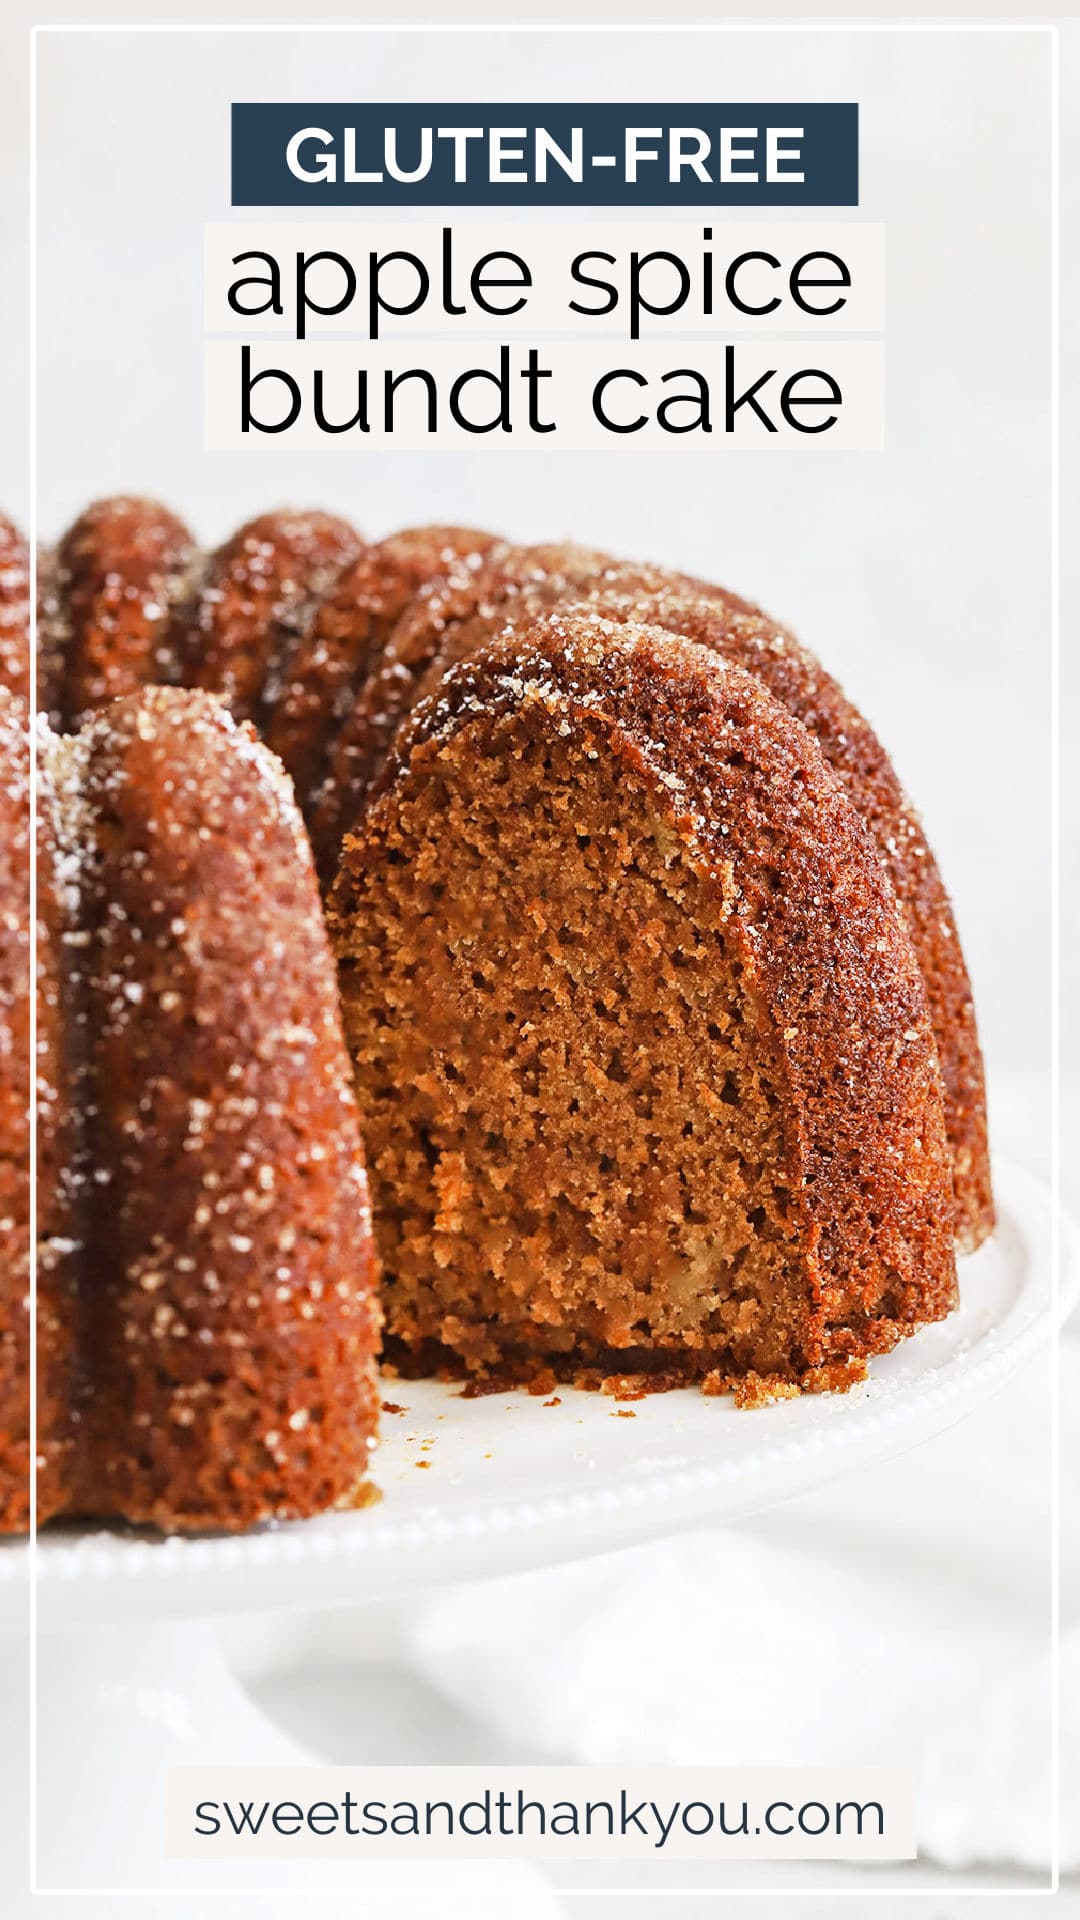 Gluten-Free Apple Spice Bundt Cake. This gluten-free apple bundt cake has warm flavors & gorgeous tender texture. Try it with caramel sauce or cinnamon sugar for a fun finish! / Apple Spice Bundt Cake Recipe / Gluten Free Bundt Cake Recipe / Fall Dessert / Gluten Free Cake / Gluten Free Apple Cake / How to keep bundt cake from sticking / Holiday Dessert / Thanksgiving Dessert / Christmas Dessert / Christmas Cake / Gluten Free Spice Cake 